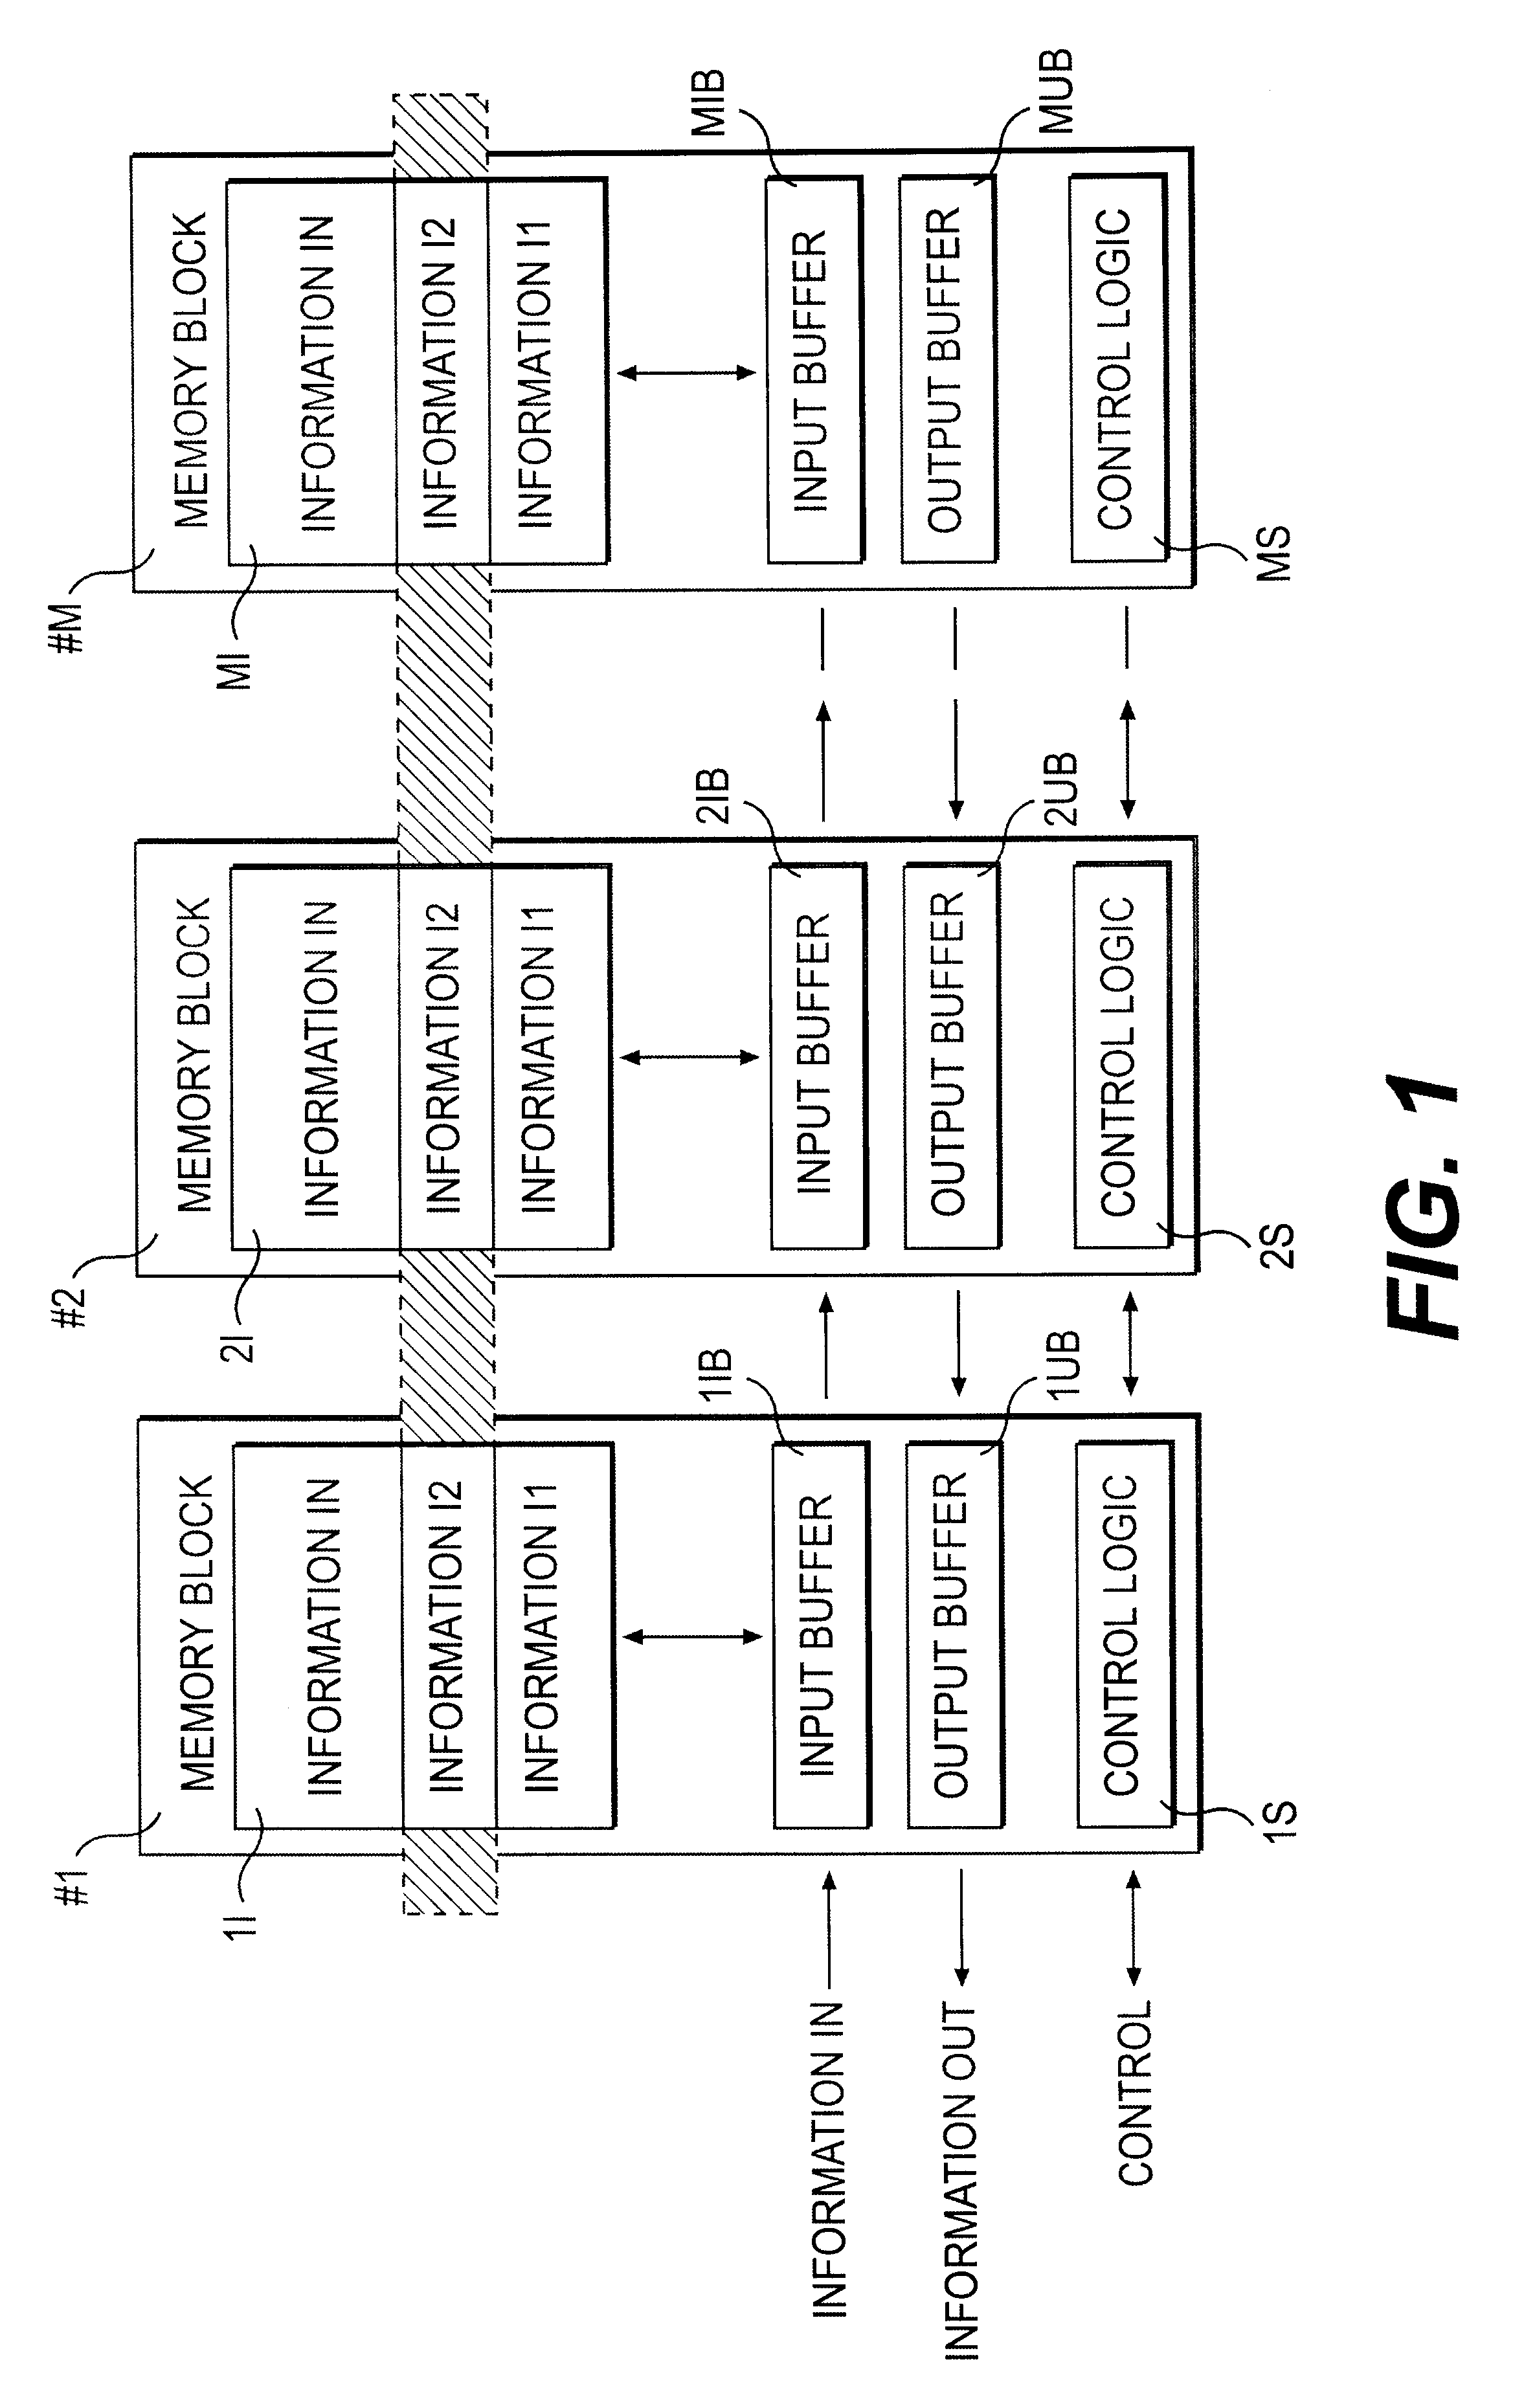 Memory structure for storage of memory vectors